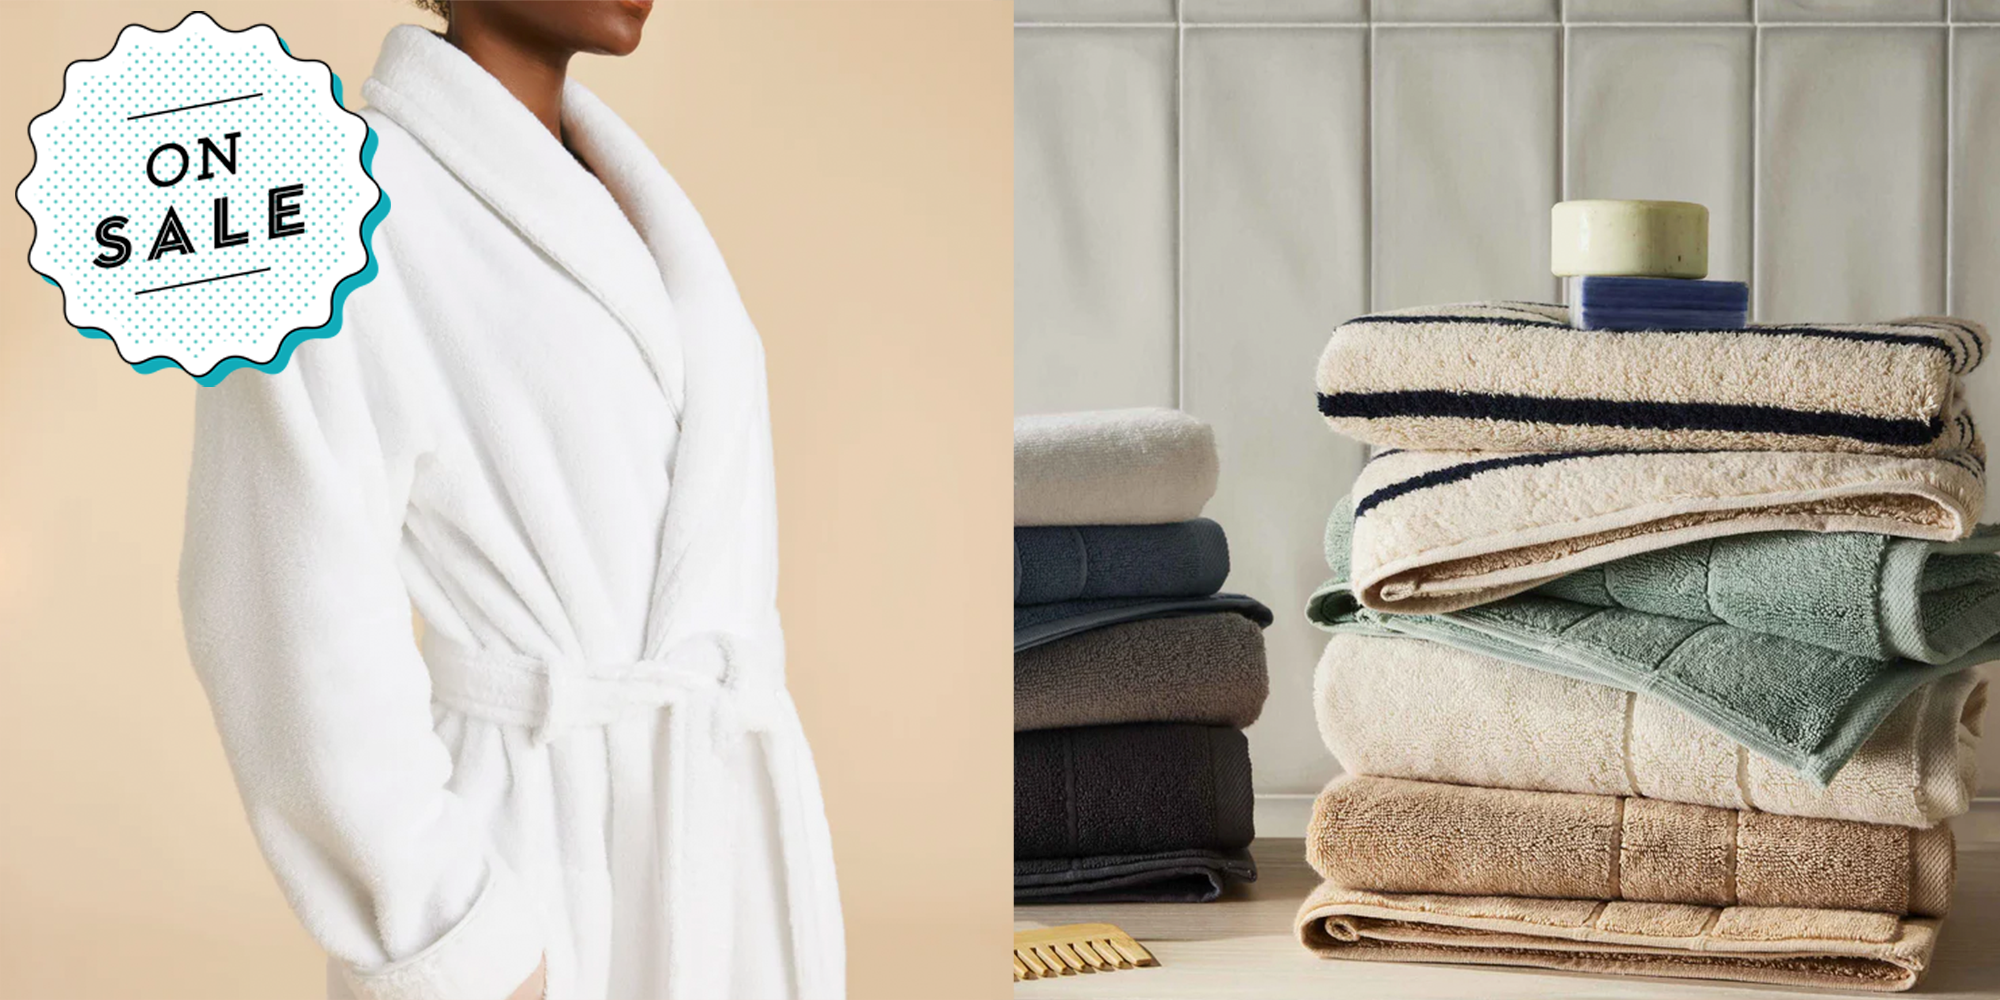 Brooklinen Cyber Monday Sale: Take 25% Off Sheets, Towels and More